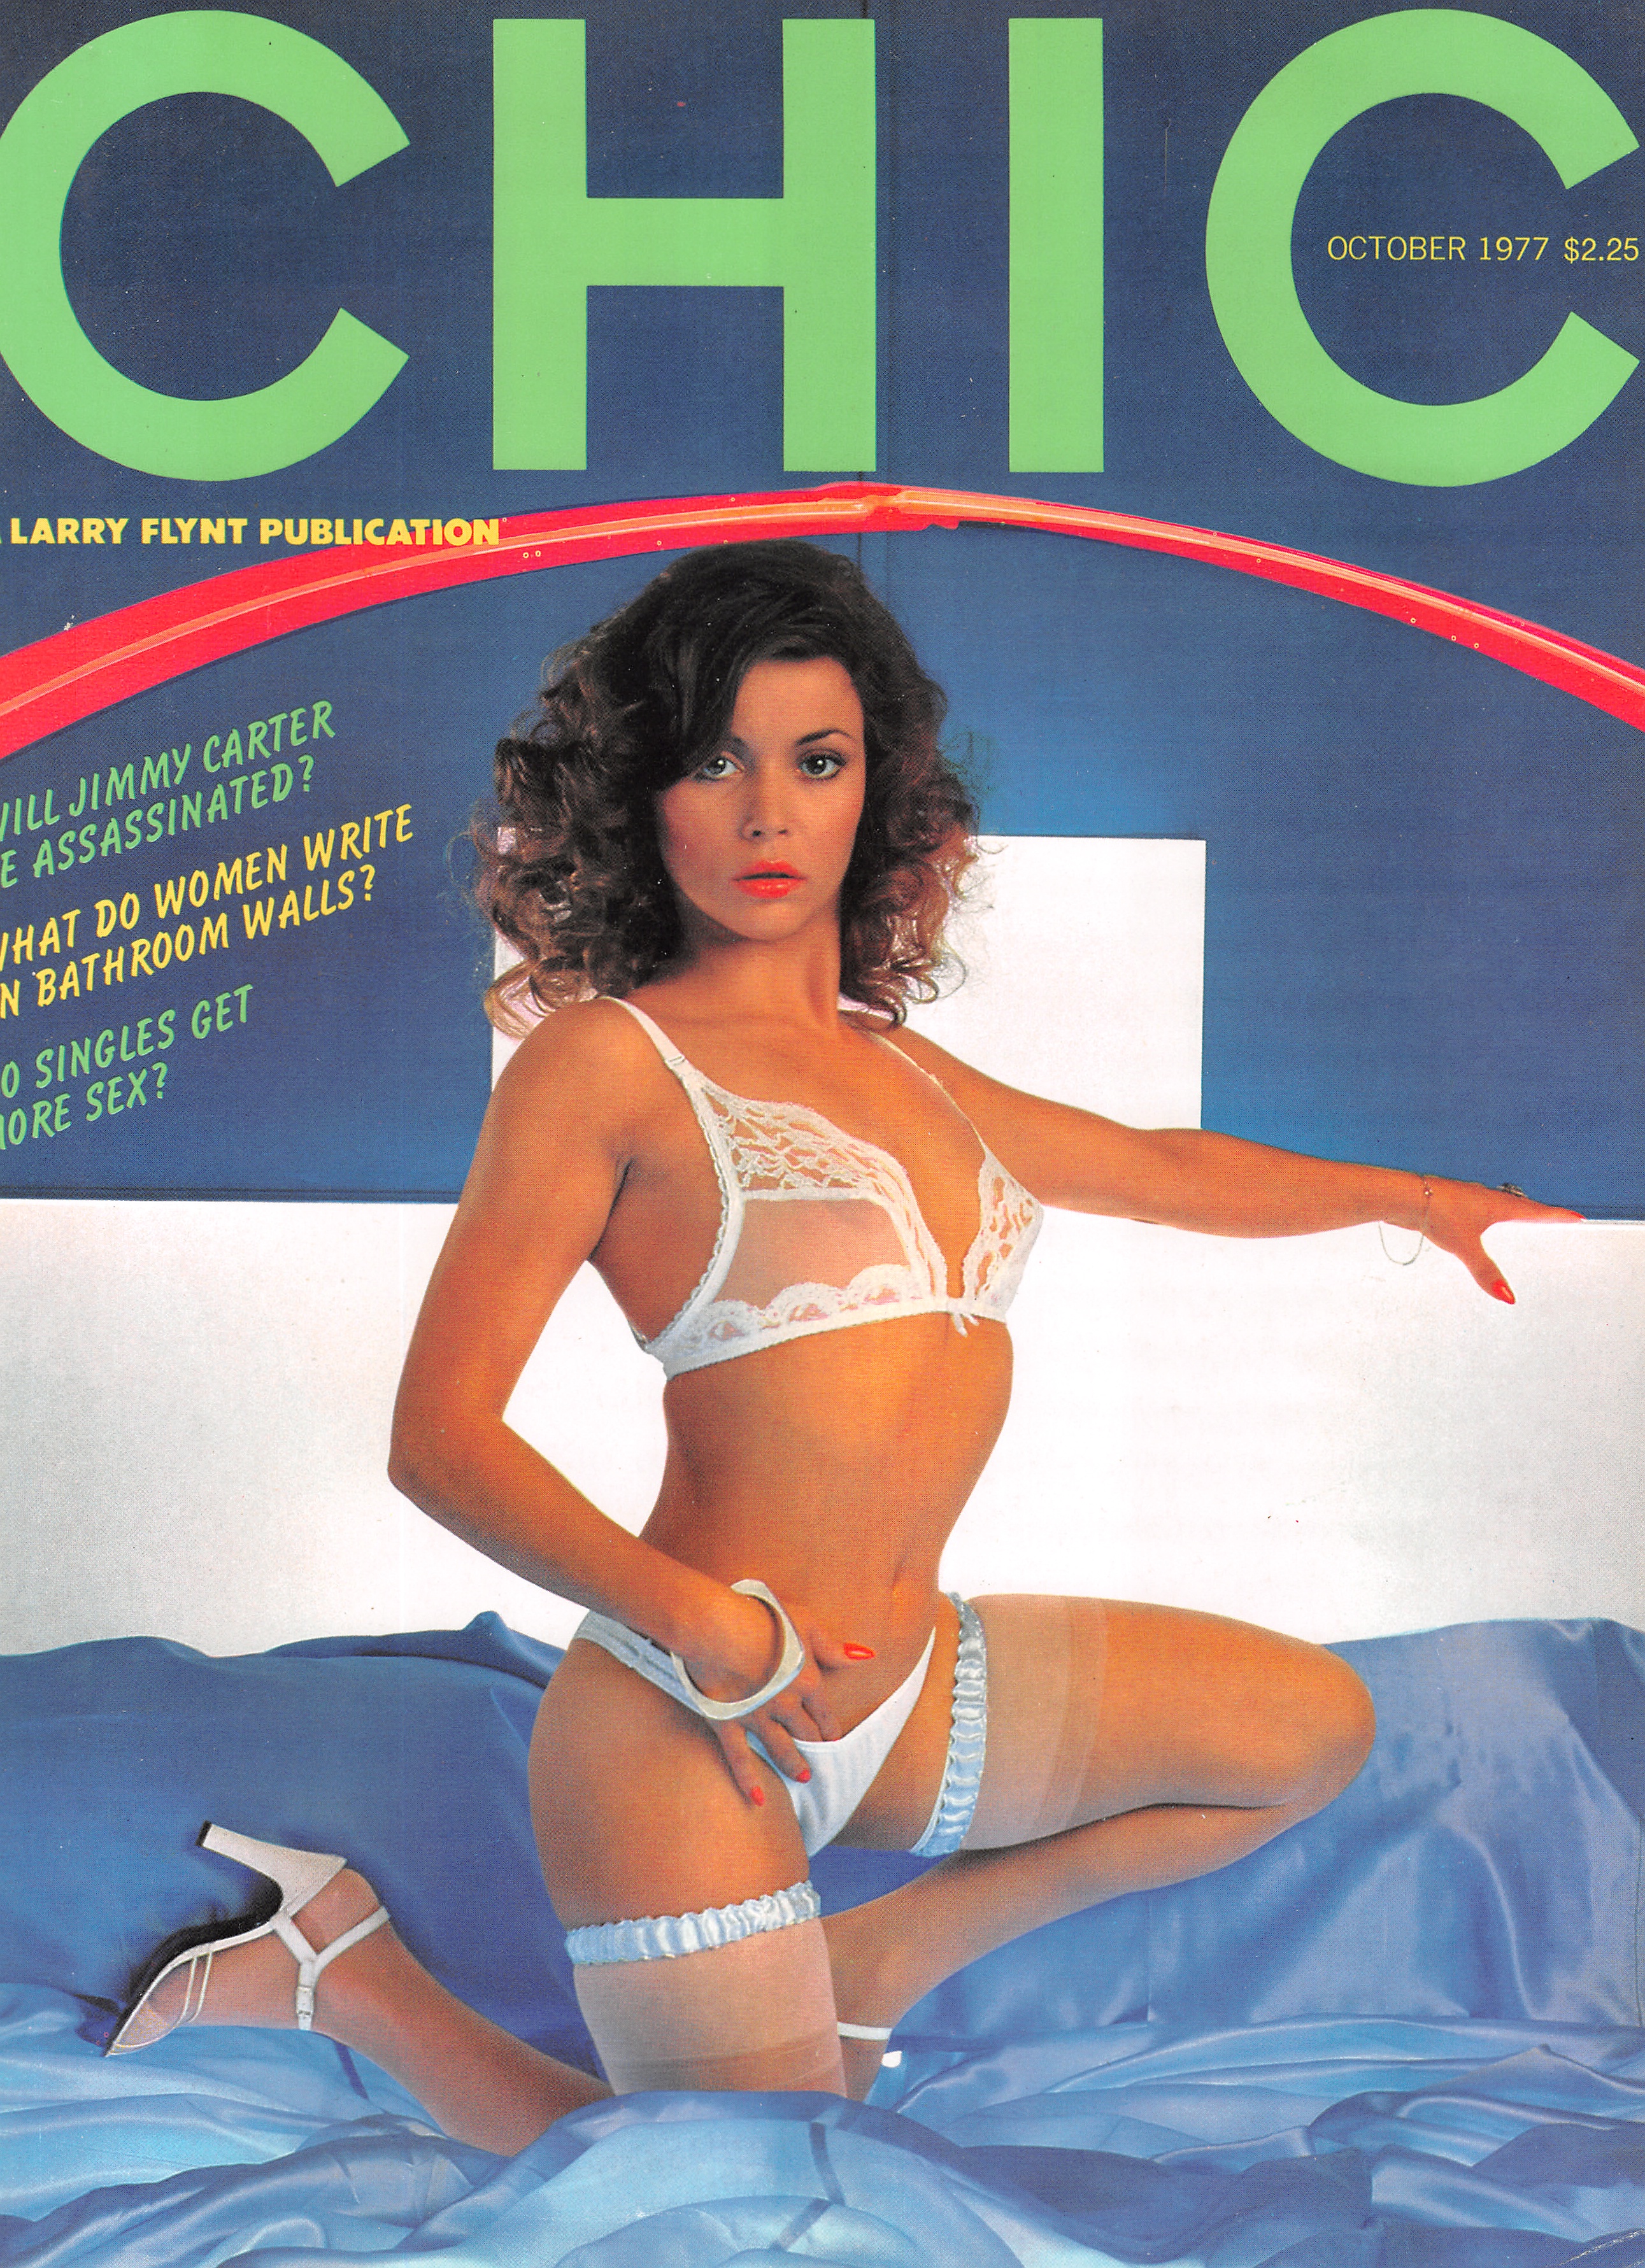 Chic October 1977 magazine back issue Chic magizine back copy Chic October 1977 Adult Pornographic Magazine Back Issue Published by LFP, Larry Flynt Publications. Covergirl Kathleen (Nude Centerfold) .